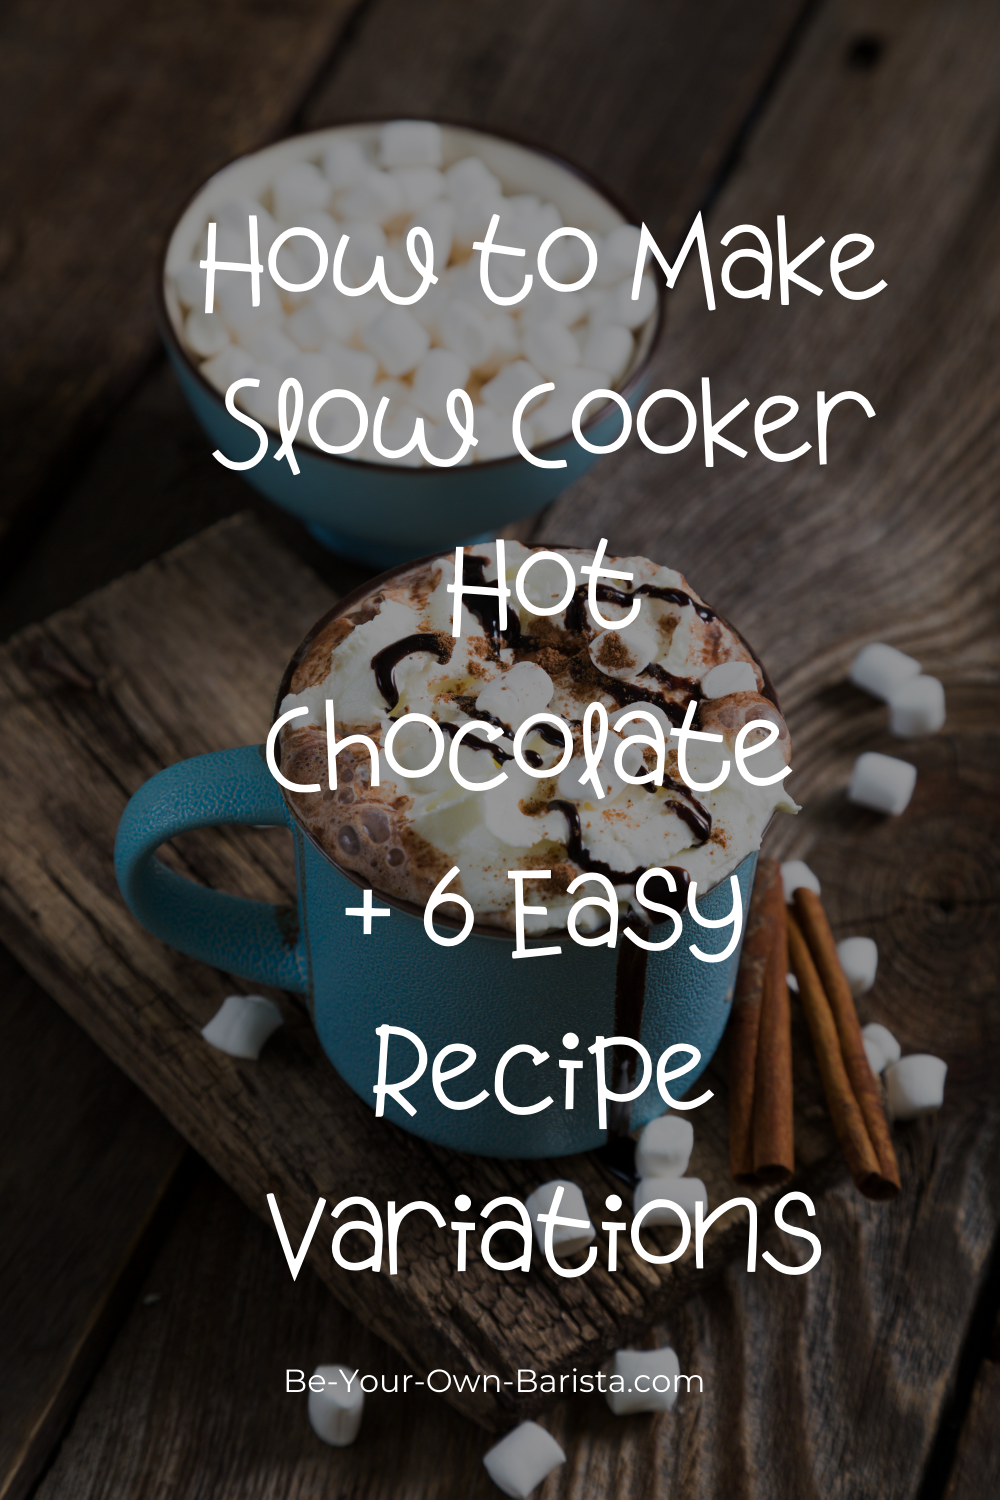 How to Make Slow Cooker Hot Chocolate + 6 Easy Recipe Variations